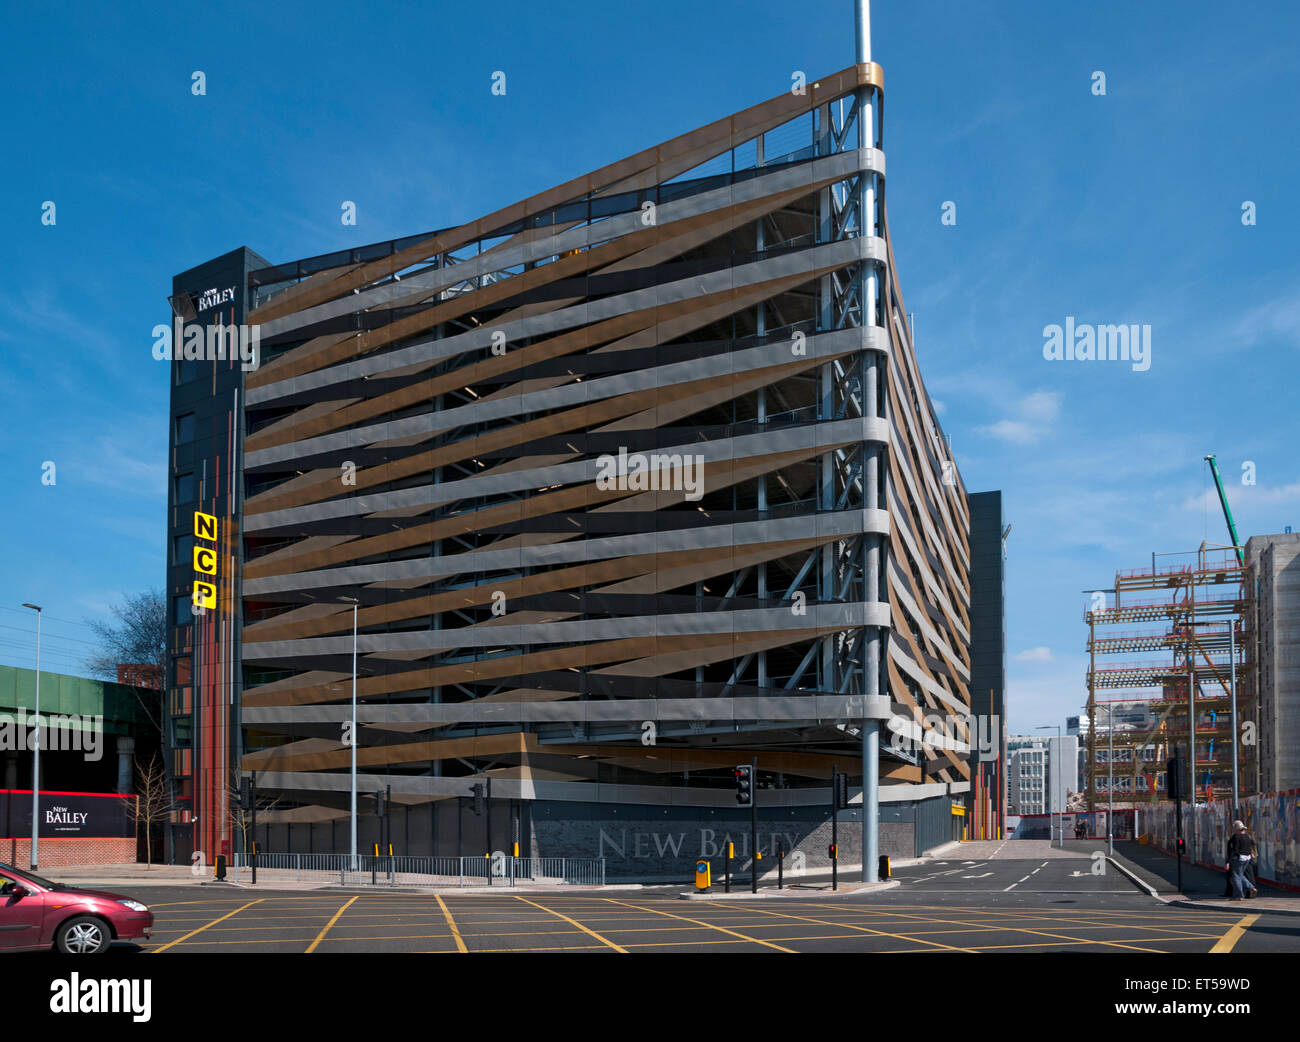 New Bailey car park, Irwell Street, Salford, Manchester, England, UK. Designed to appear to be wrapped with ribbons. Stock Photo